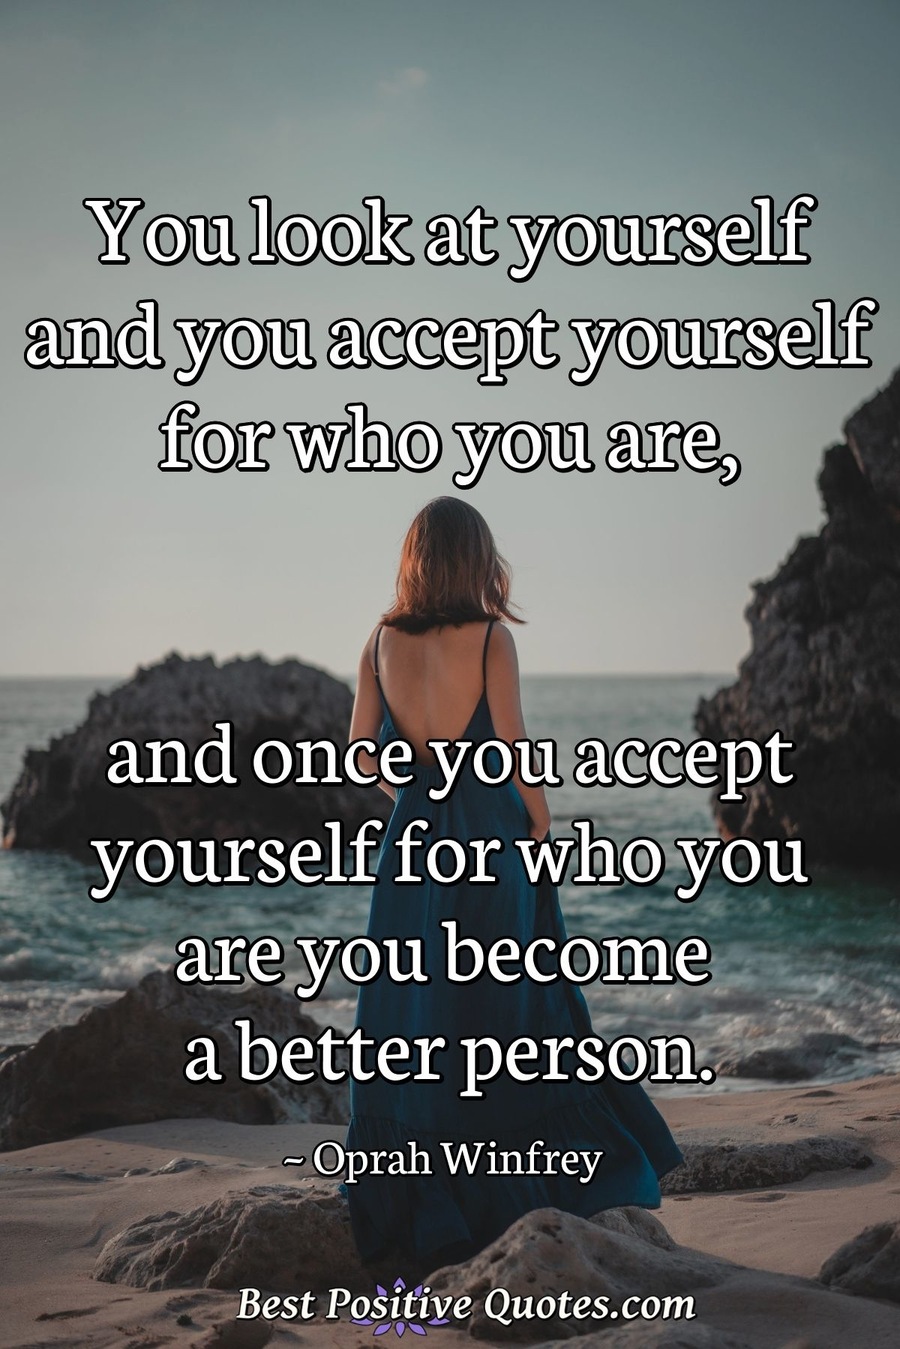 The moment you accept yourself, you grow. - Best Positive Quotes